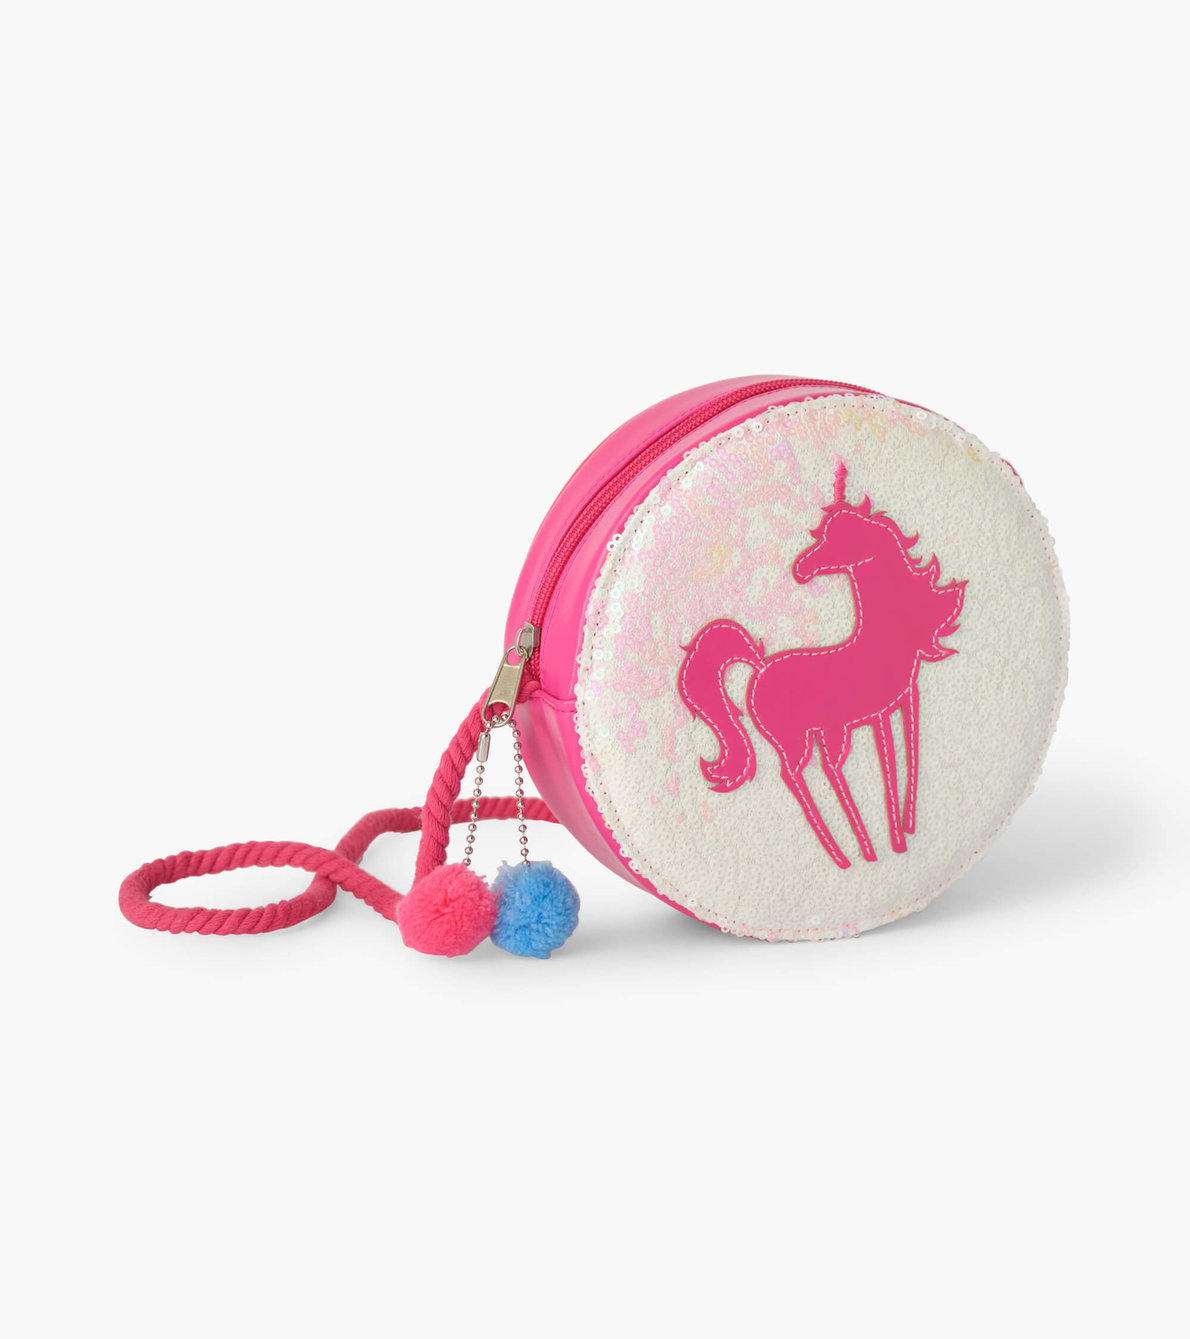 View larger image of Sparkling Unicorn Cross Body Bag